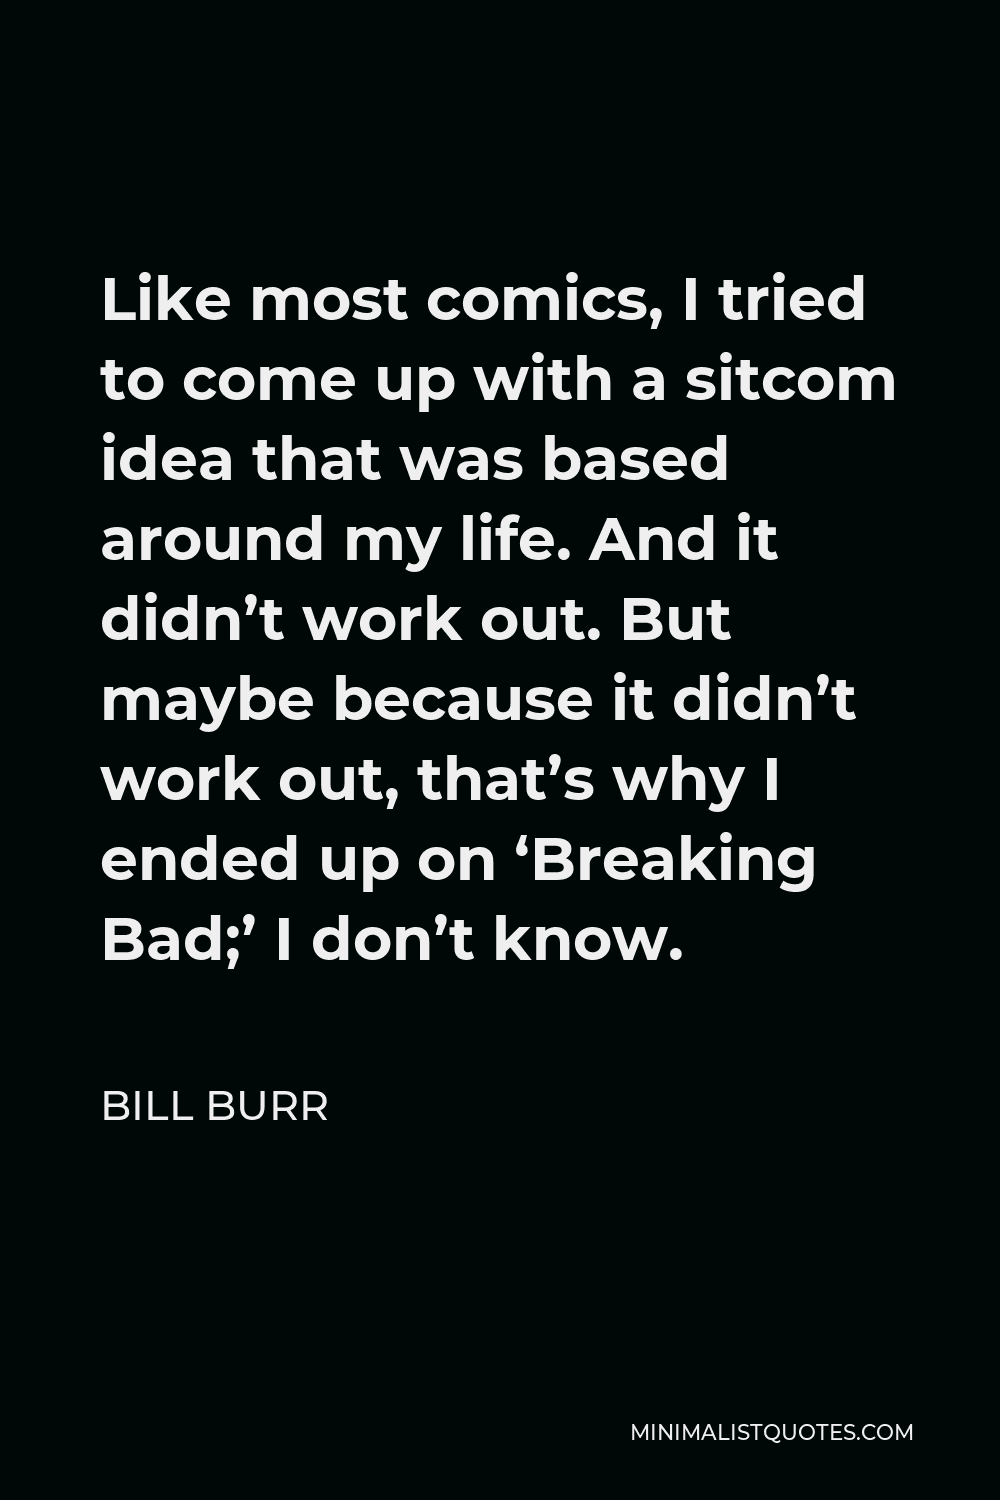 Bill Burr Quote - Like most comics, I tried to come up with a sitcom idea that was based around my life. And it didn’t work out. But maybe because it didn’t work out, that’s why I ended up on ‘Breaking Bad;’ I don’t know.